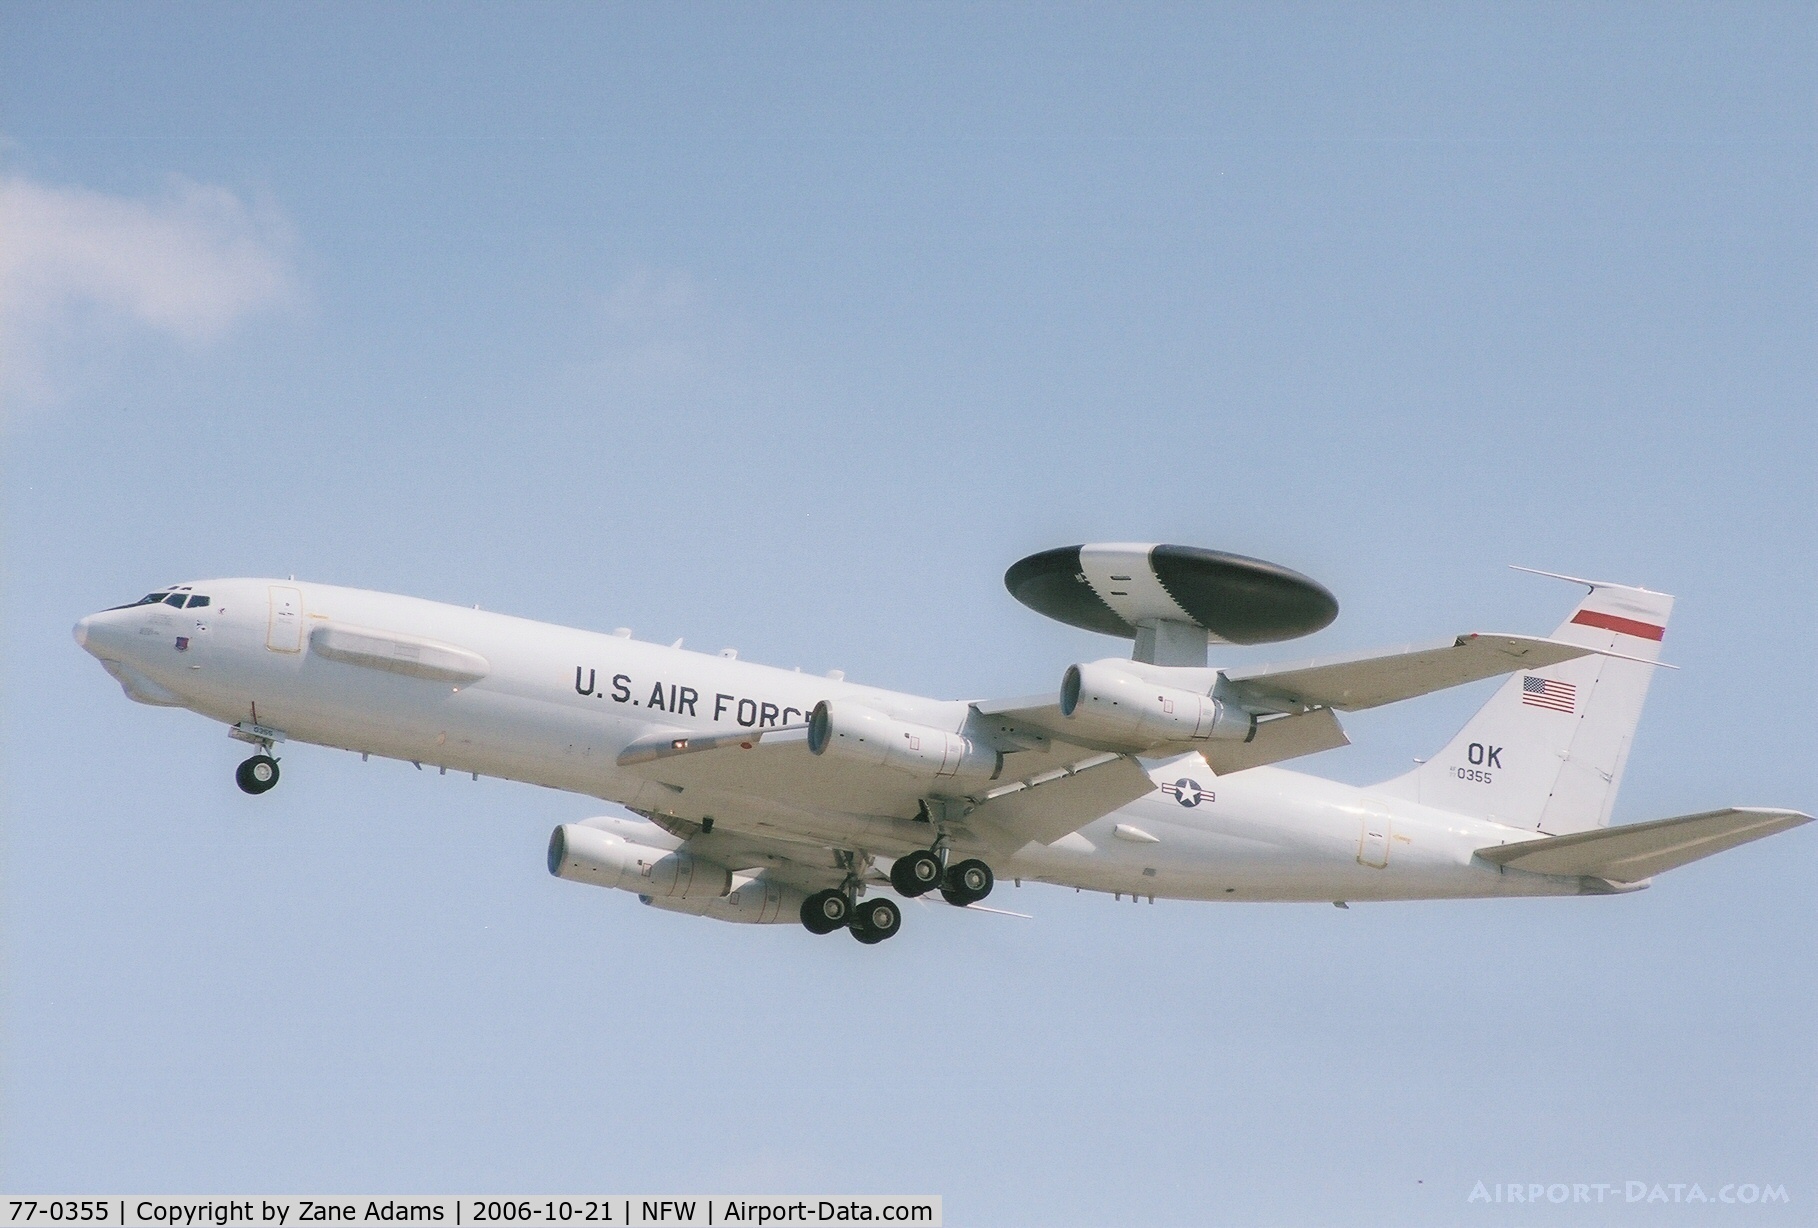 77-0355, 1977 Boeing E-3A Sentry C/N 21555, Takeoff from Navy Ft. Worth - Carswell